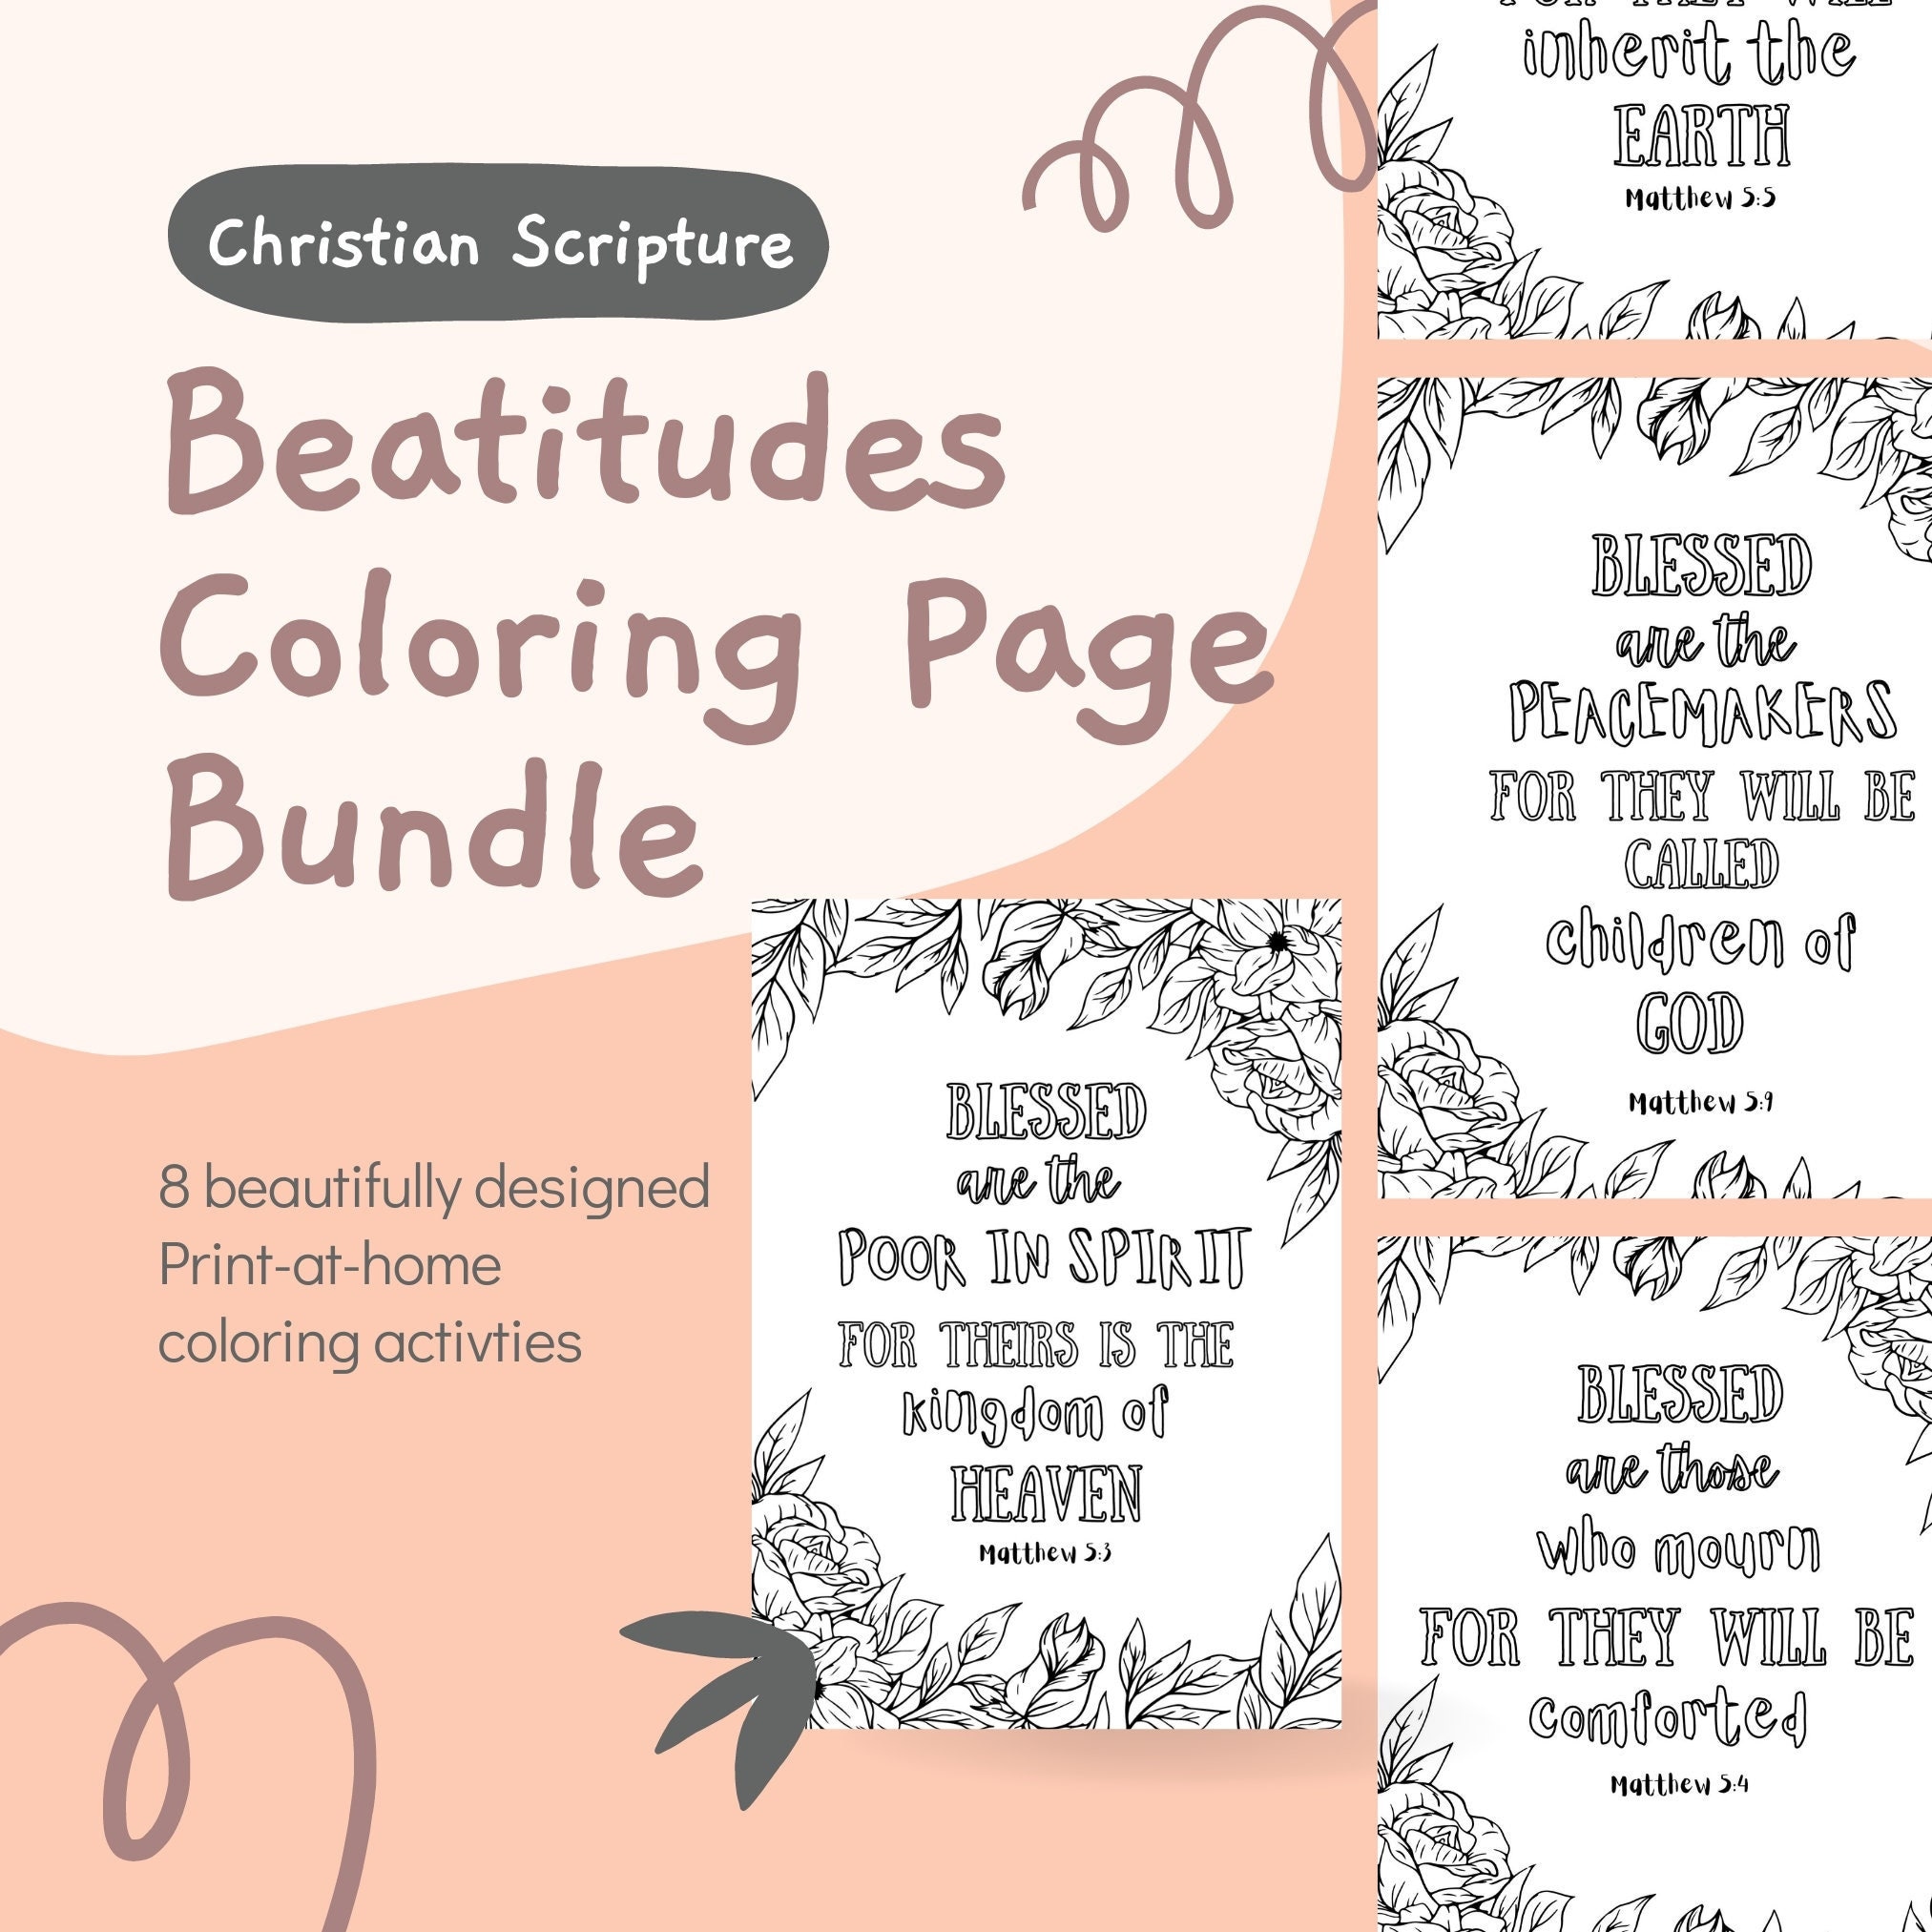 Beatitudes coloring page for adults and children printable scripture bible verse coloring page christian activity wall art